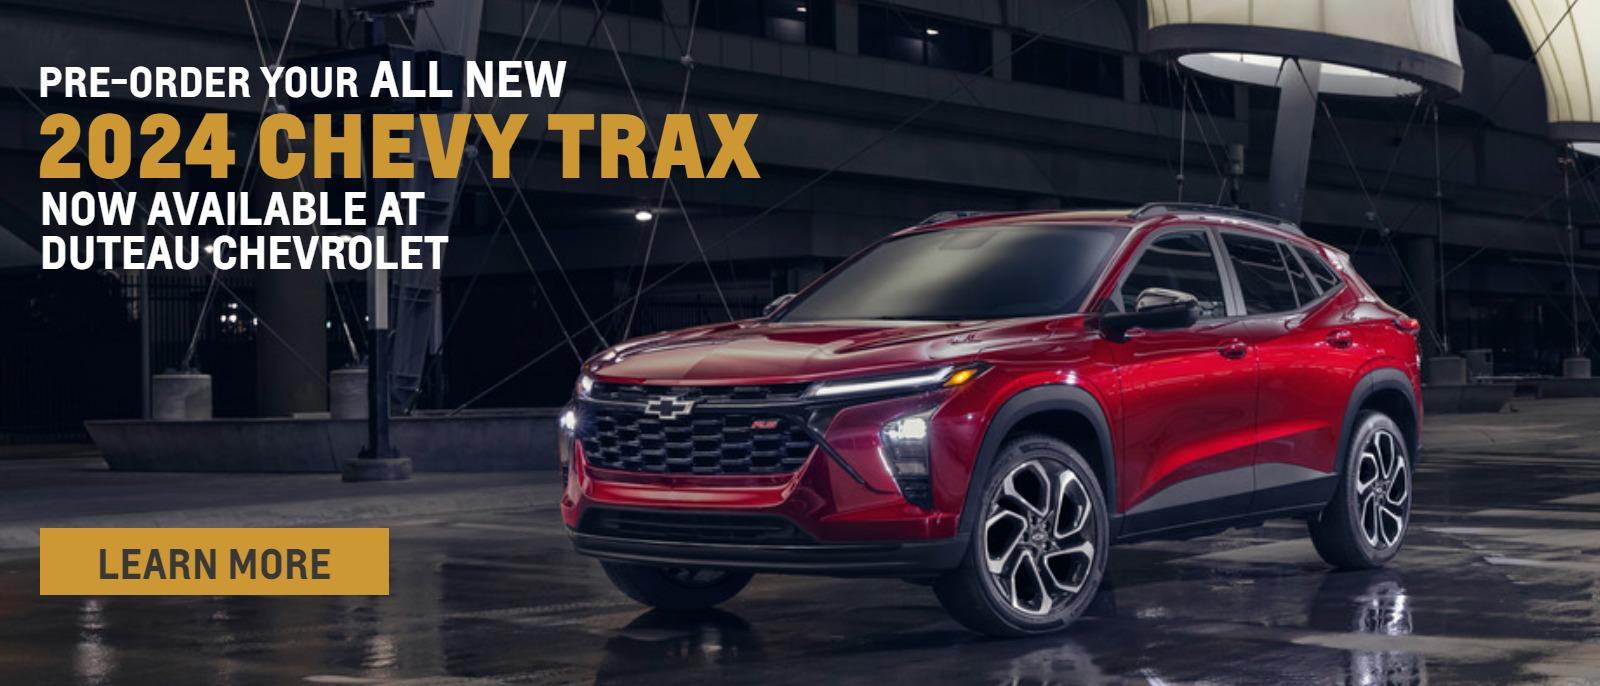 Pre-Order Your ALL NEW
2024 CHEVY TRAX
Now available at DuTeau Chevrolet